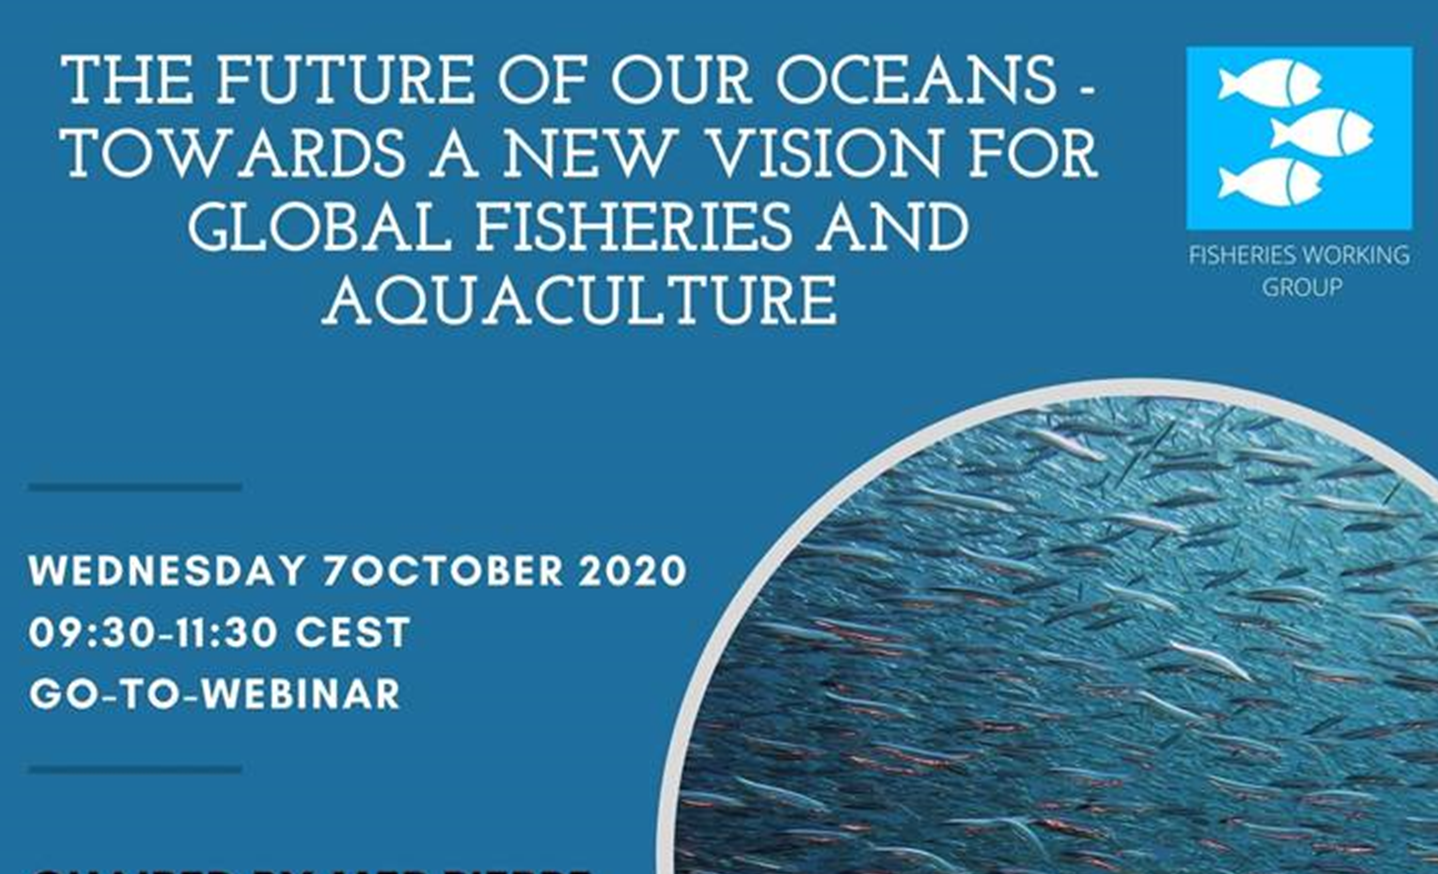 The future of our oceans: Towards a new vision for global fisheries & aquacultures